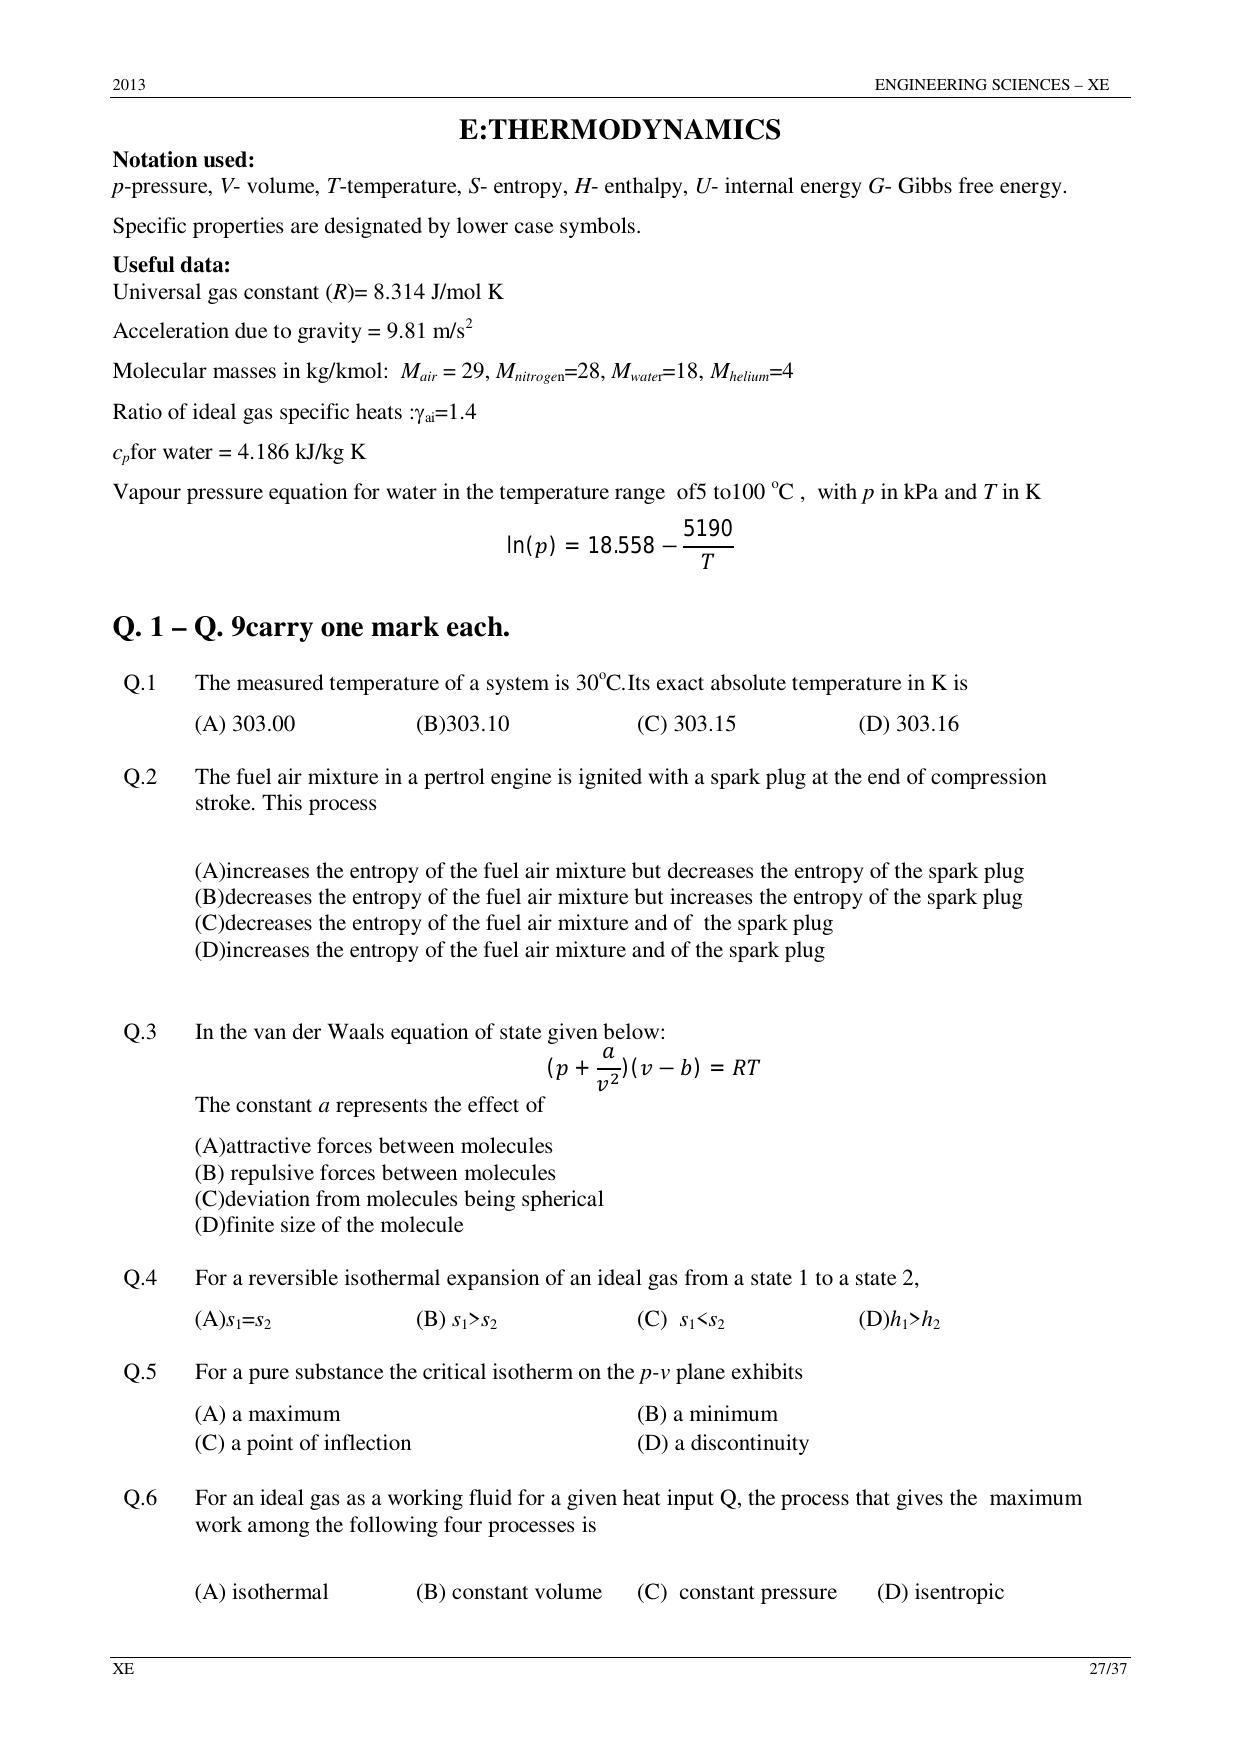 GATE 2013 Engineering Sciences (XE) Question Paper with Answer Key - Page 27